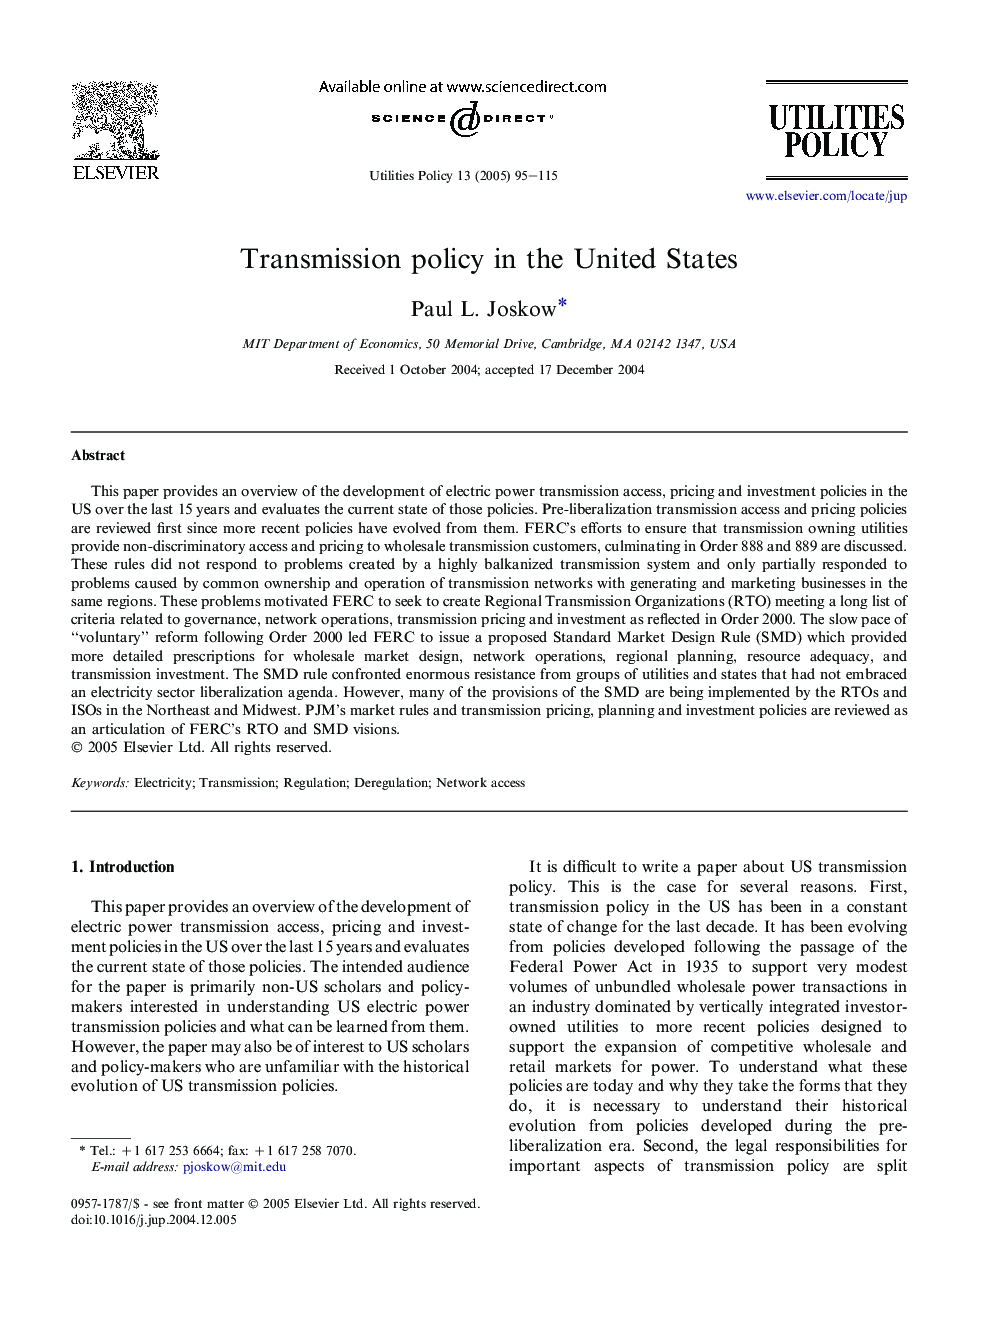 Transmission policy in the United States